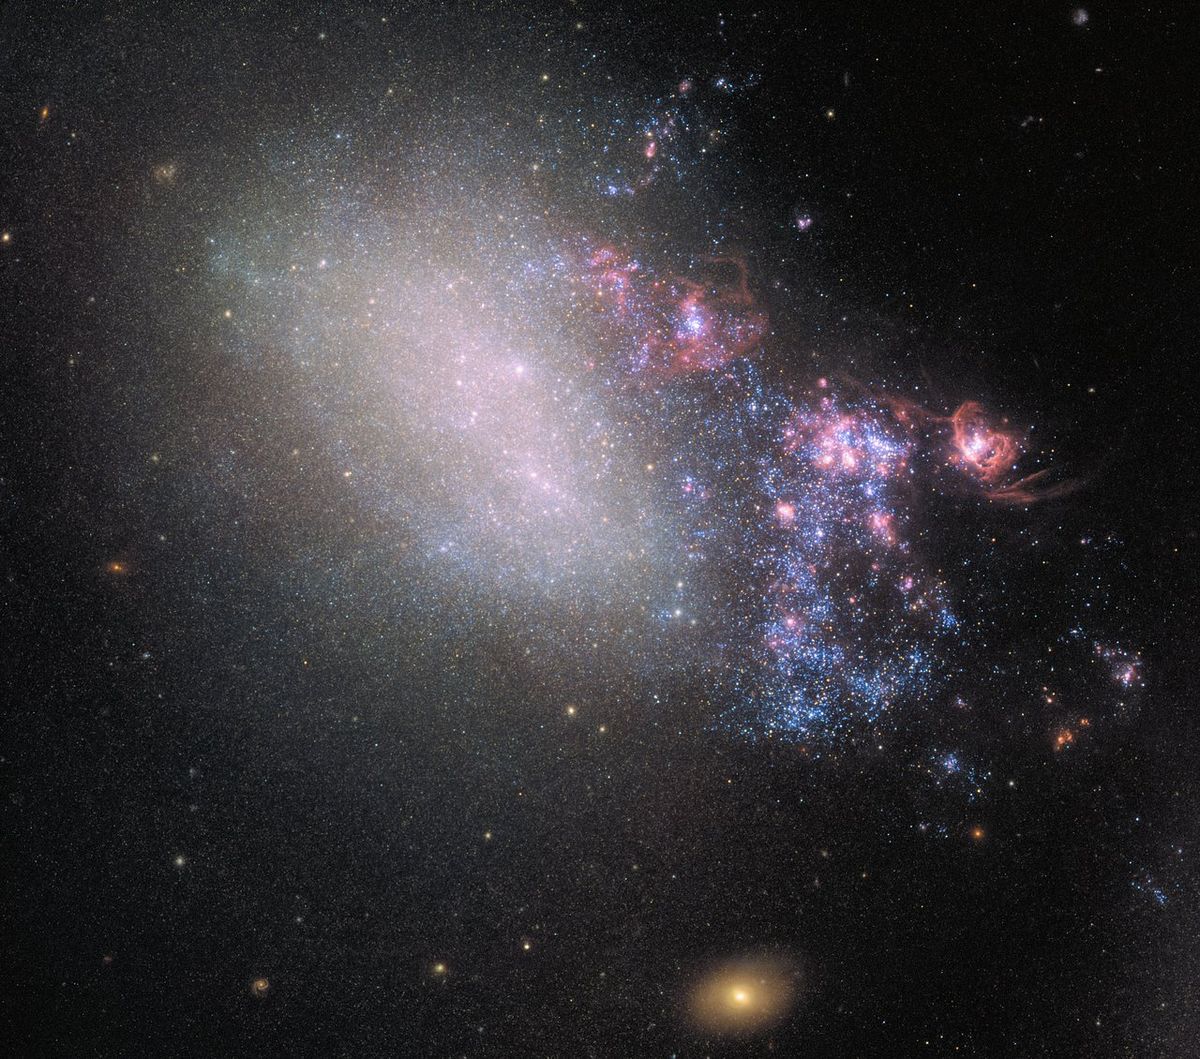 Galaxy Collision Creates “Space Triangle” in New Hubble Image 